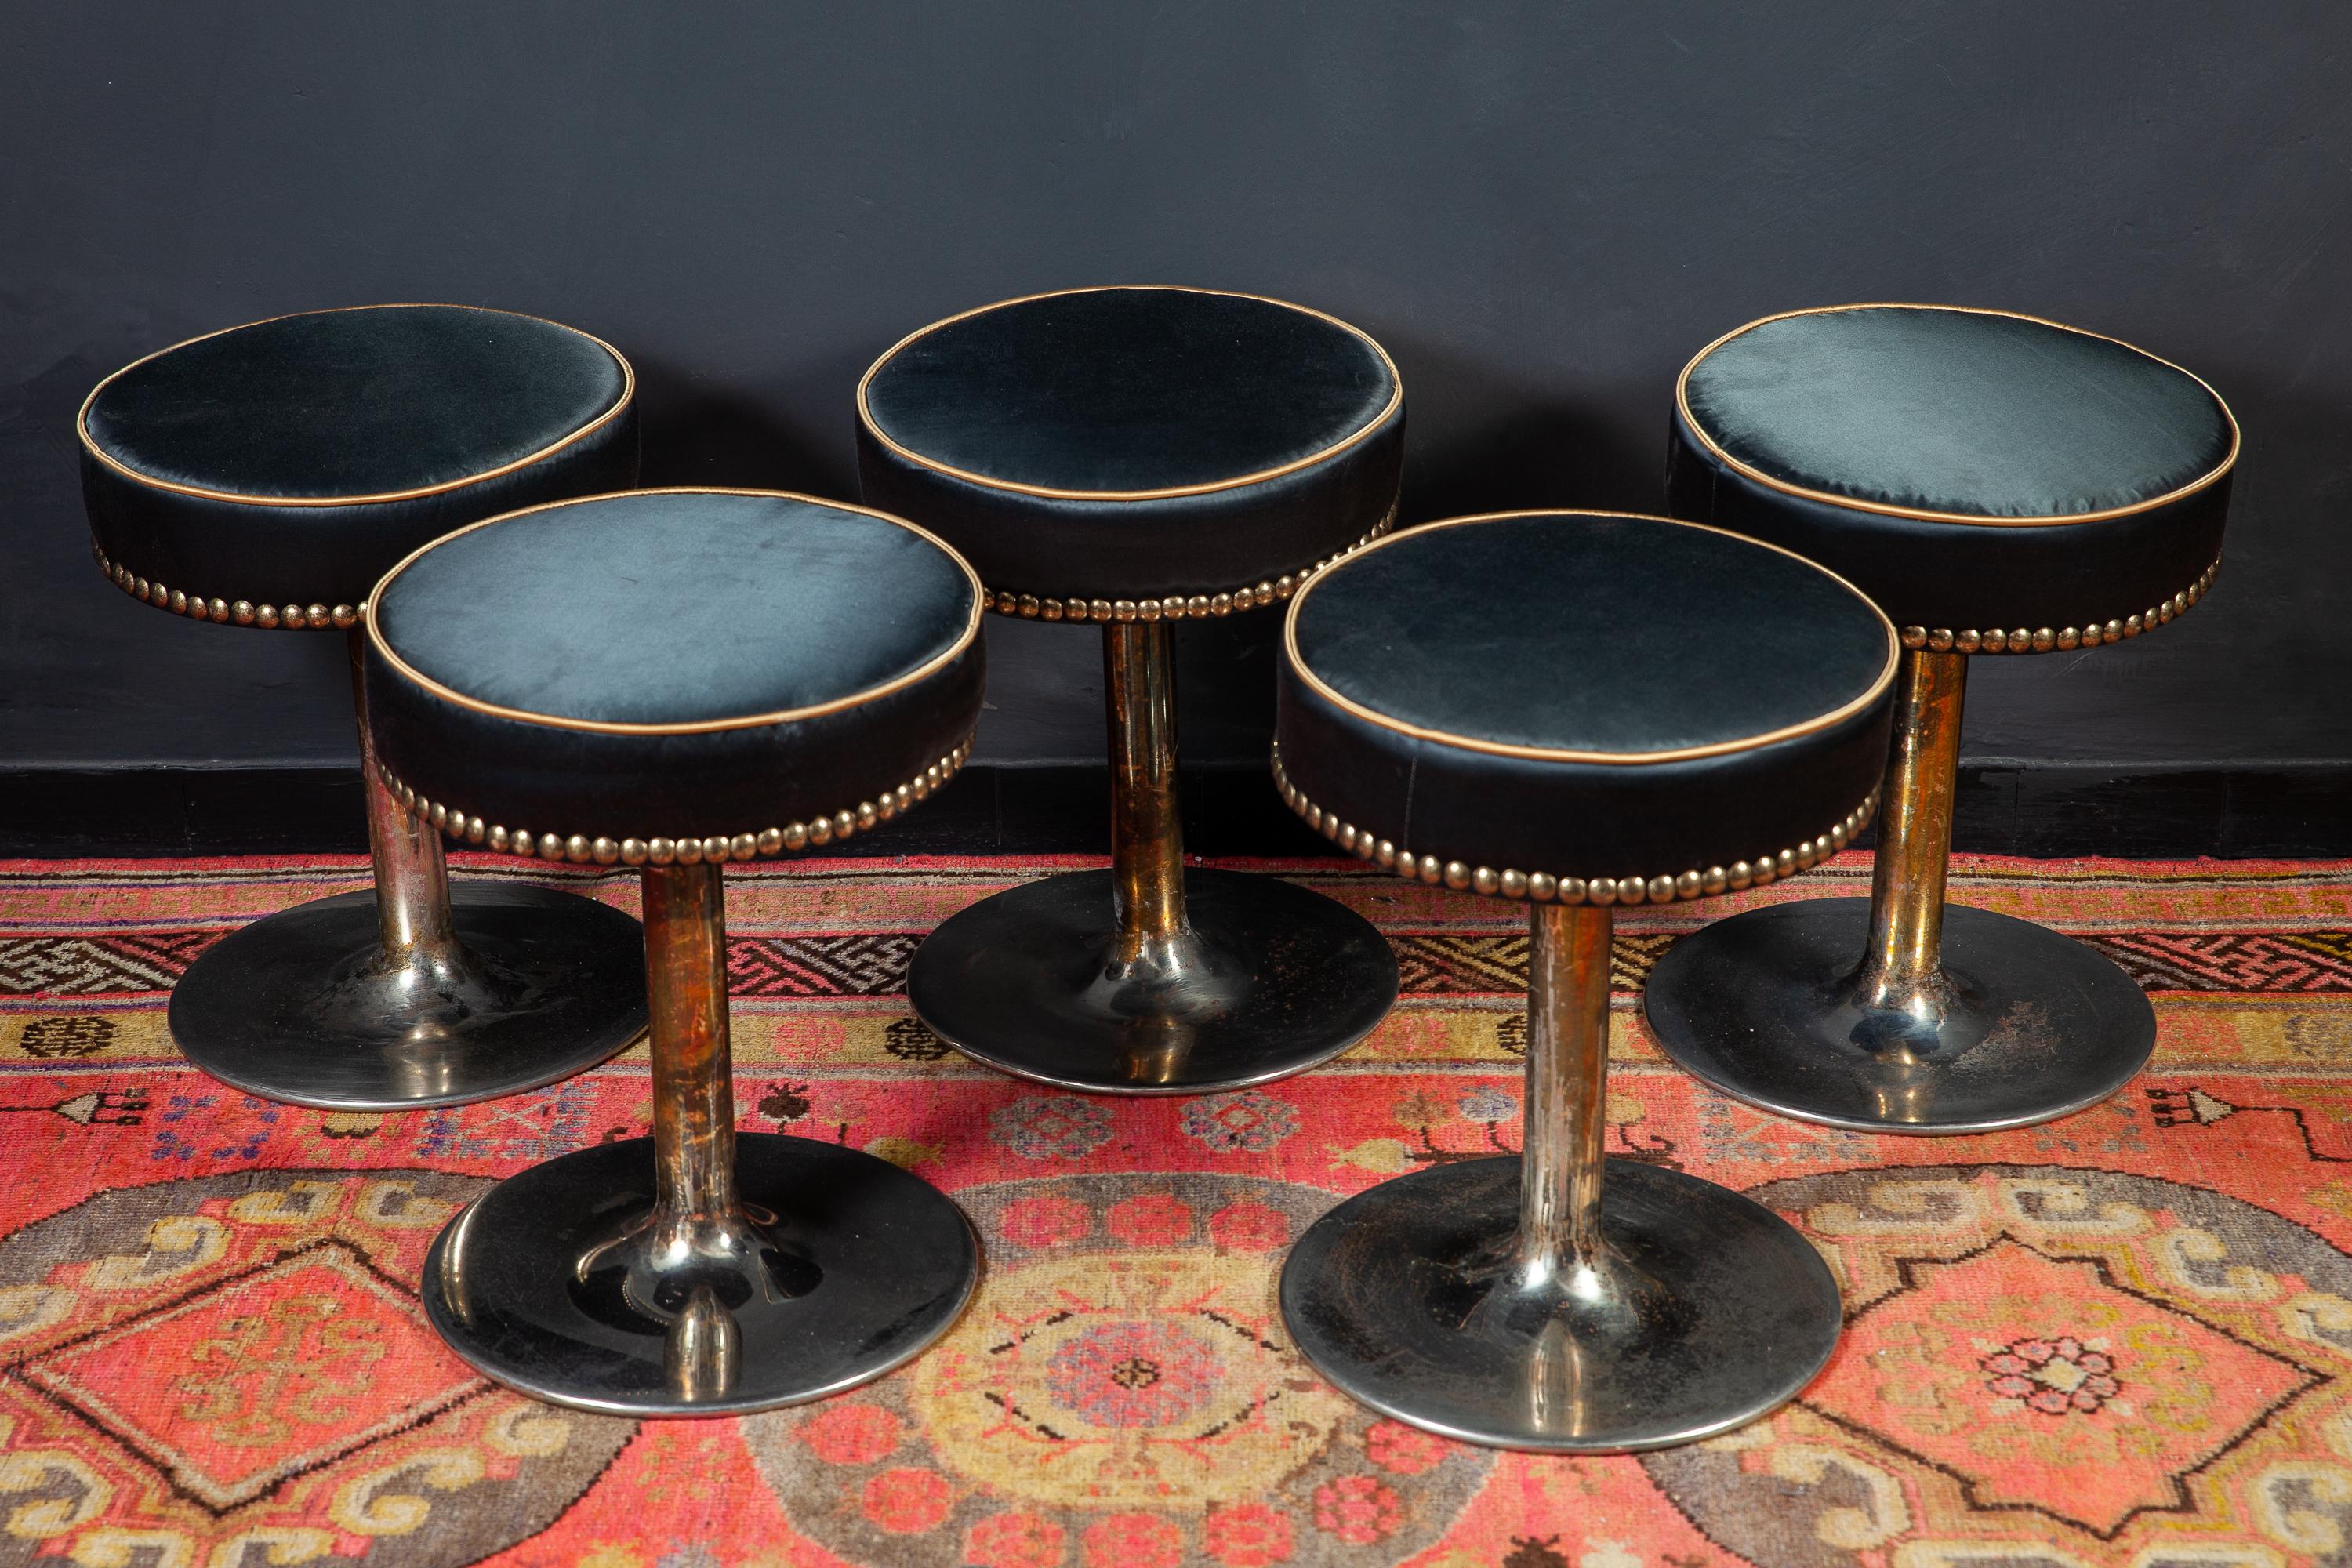 Borge Johansson Scandinavian Mid-Century Modern black silk and brass stools, 1960

This fine set of five Scandinavian Modern chromed swivel stools designed by Borge Johansson are provenience from a Historic dancing club of Copenhagen.
Black silk